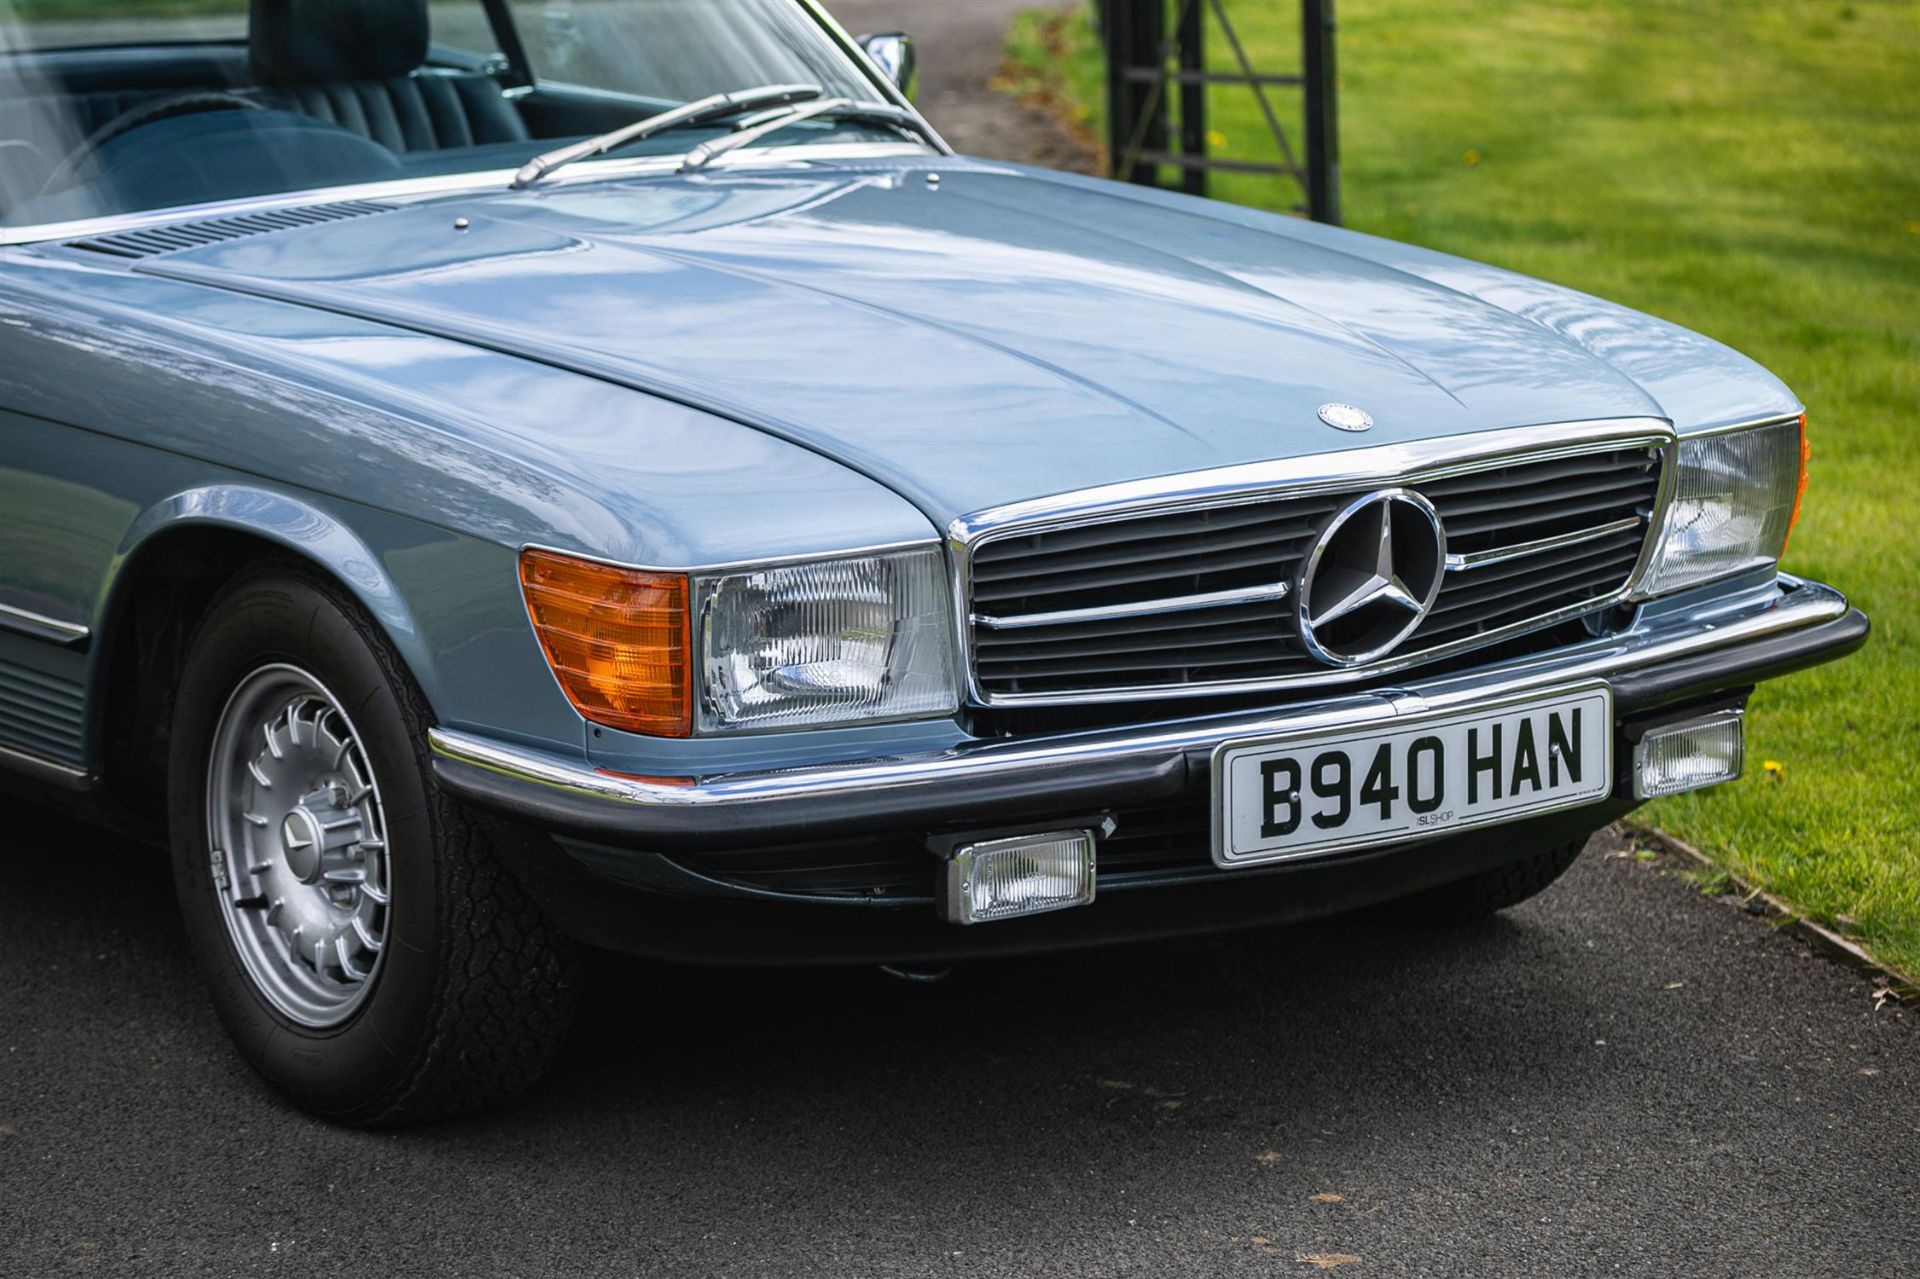 1985 Mercedes Benz 280SL (R107) with hardtop - 28,700 Miles - Image 8 of 10